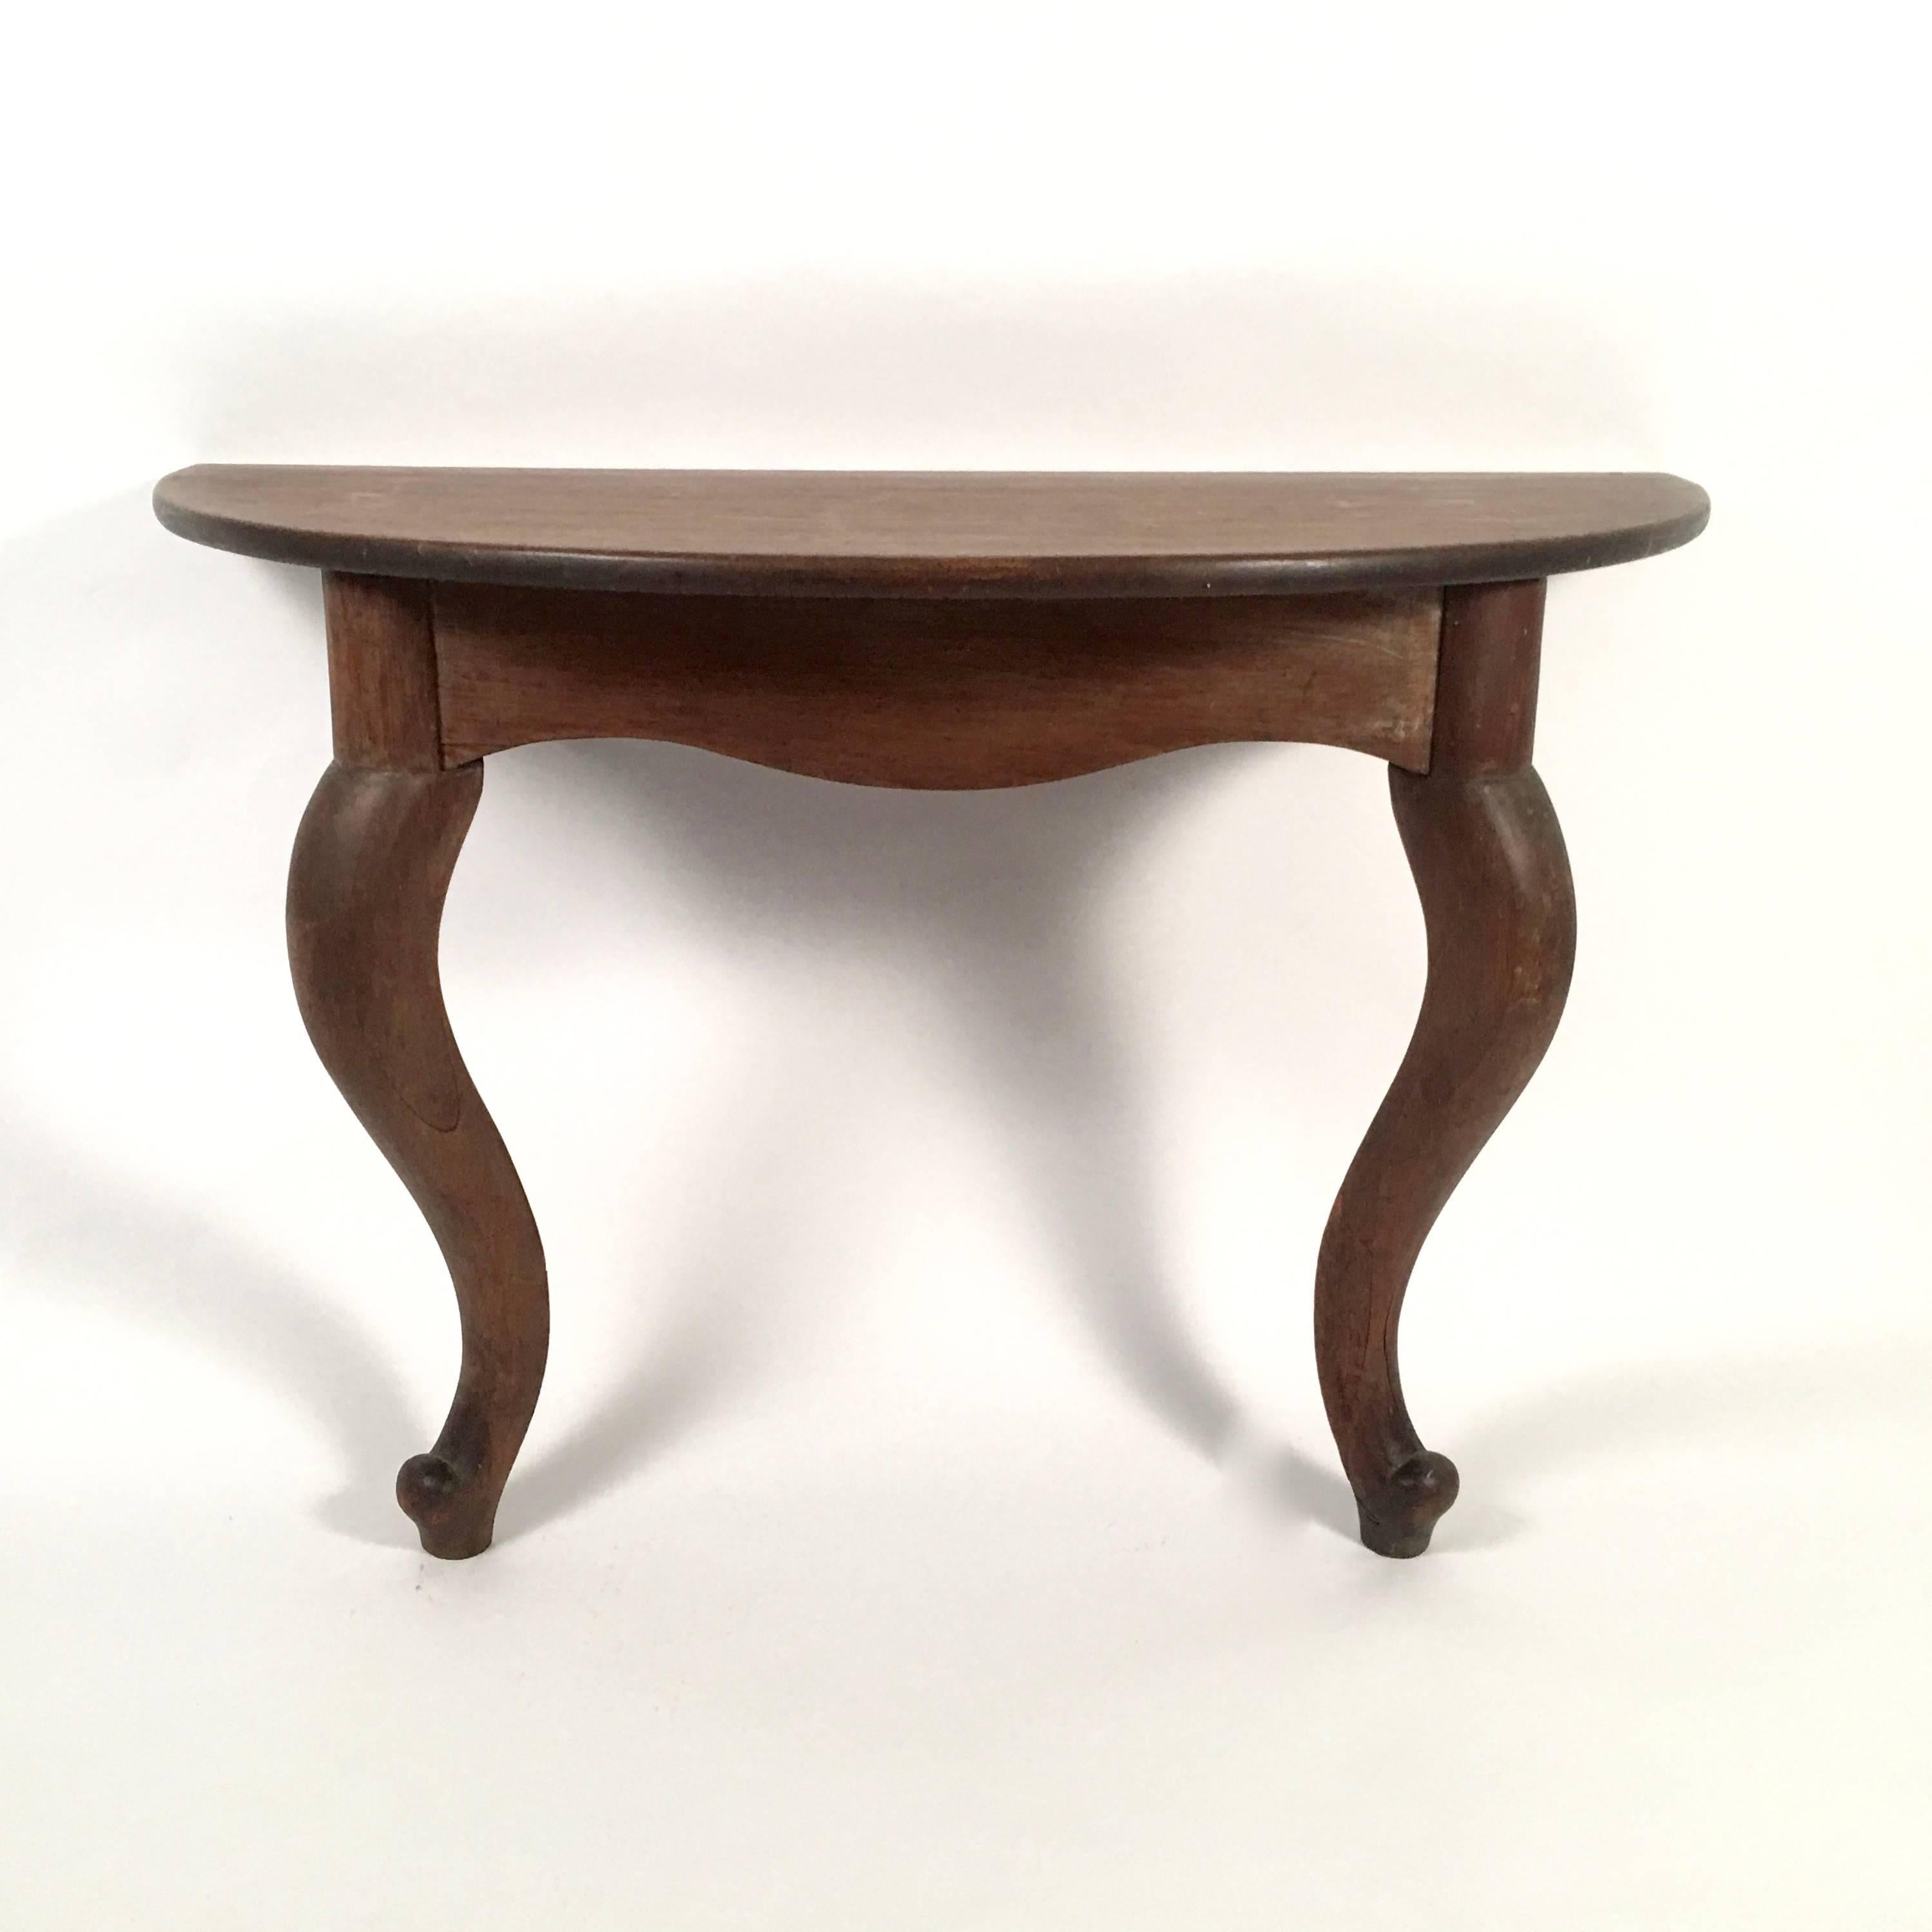 A wonderfully sculptural pair of solid walnut console tables, the semi circular tops supported by cabriole legs, American, circa 1840. These tableS have great presence and retain a beautiful old, dry finish. In their simplicity and boldness, they